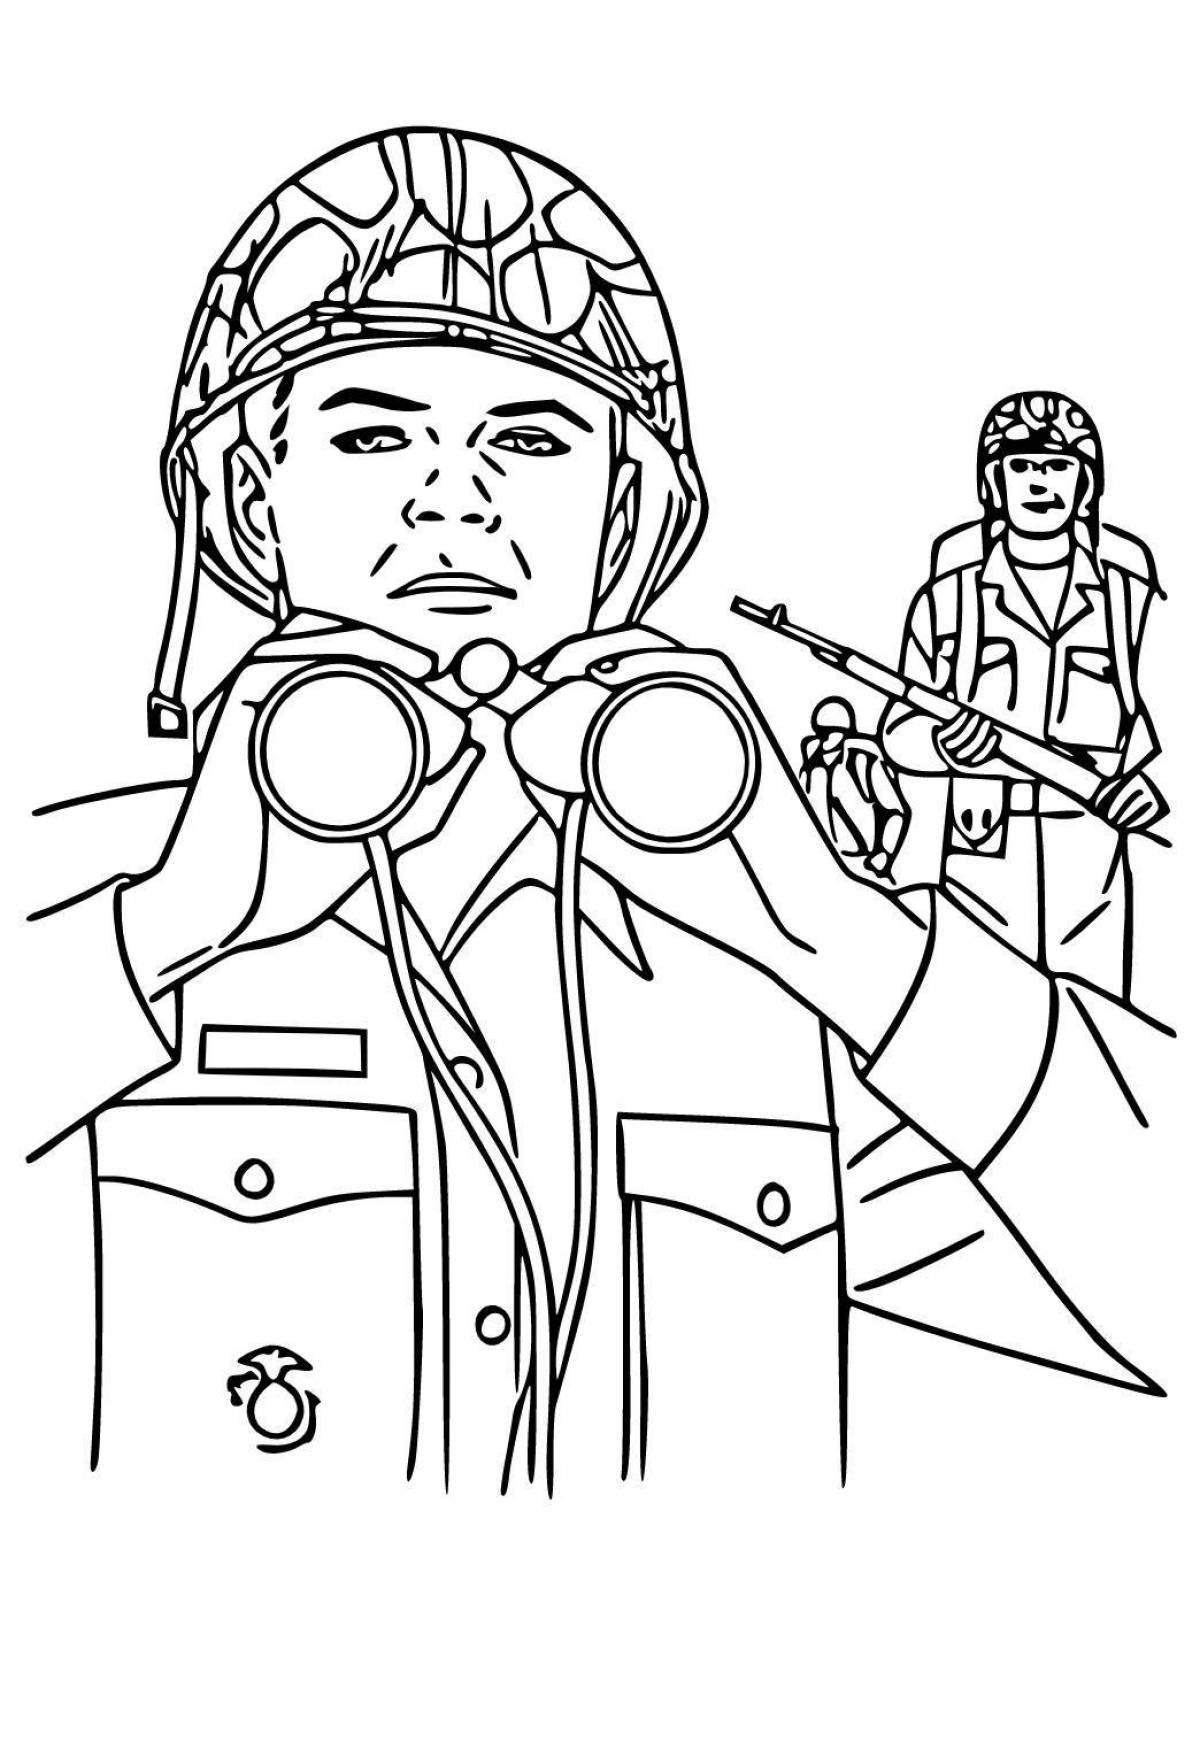 Smart soldier face coloring page for kids